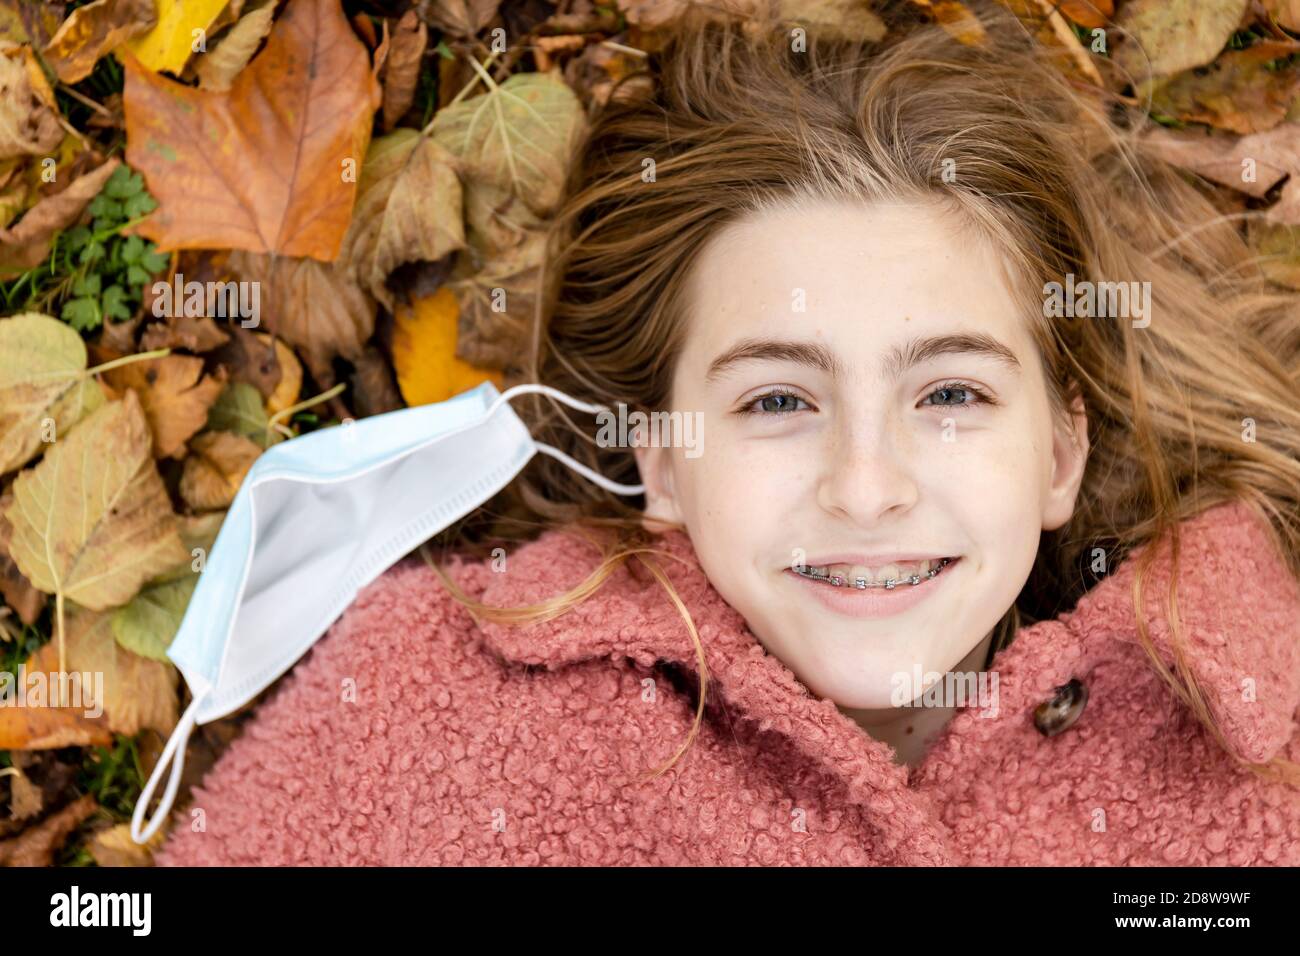 Teenage girl wearing braces smiling and laying in autumn leaves with a face mask besides her. Stock Photo